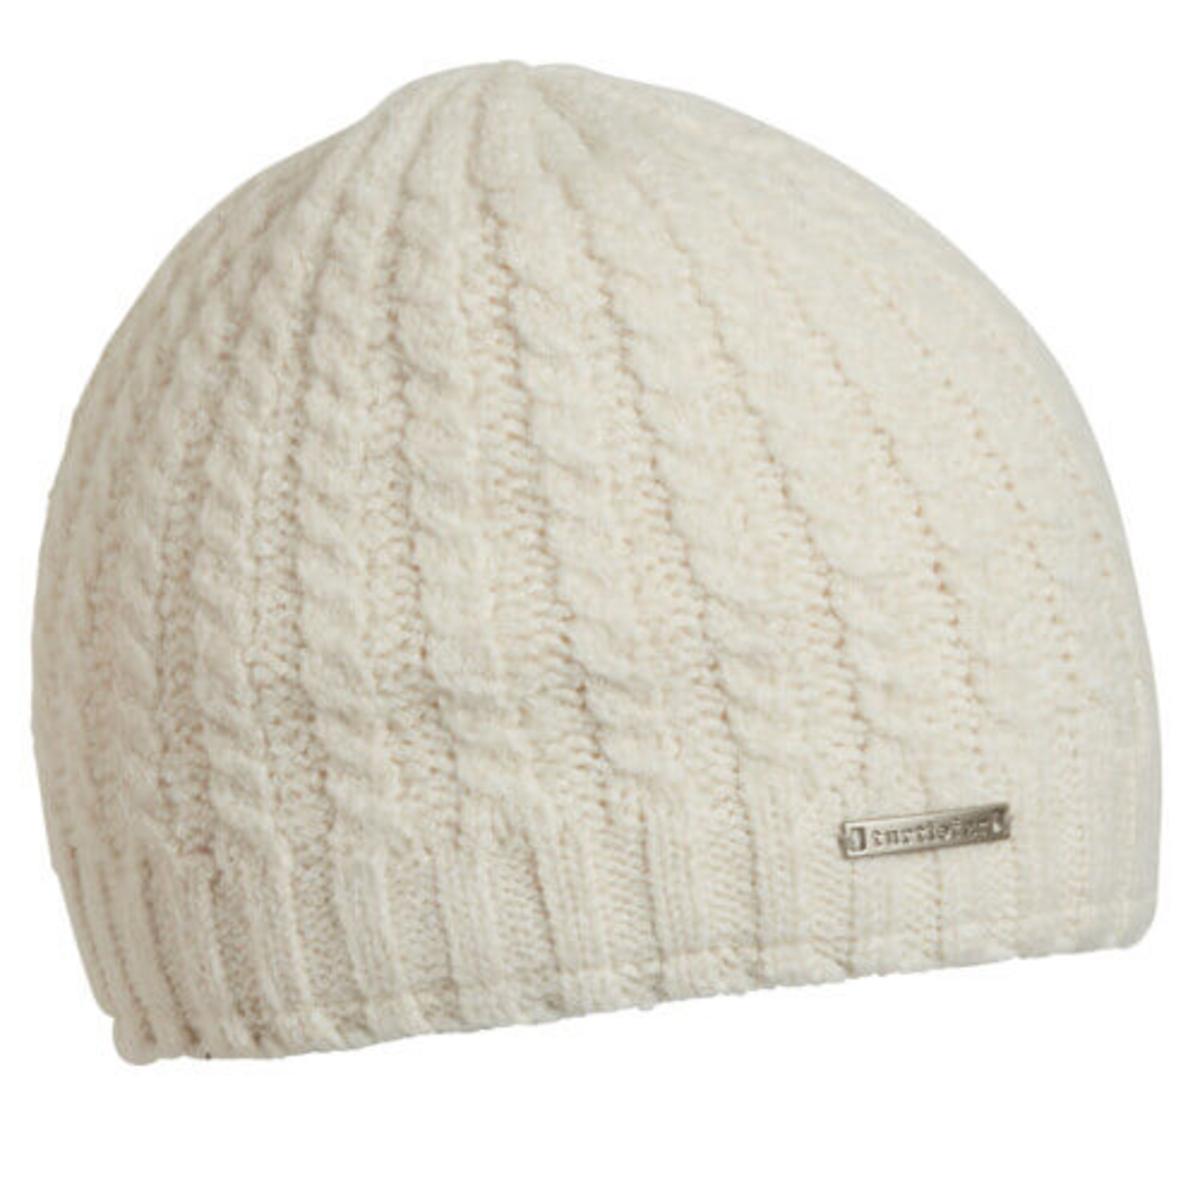 Turtle Fur Pelly Recycled Knit Winter Hat White